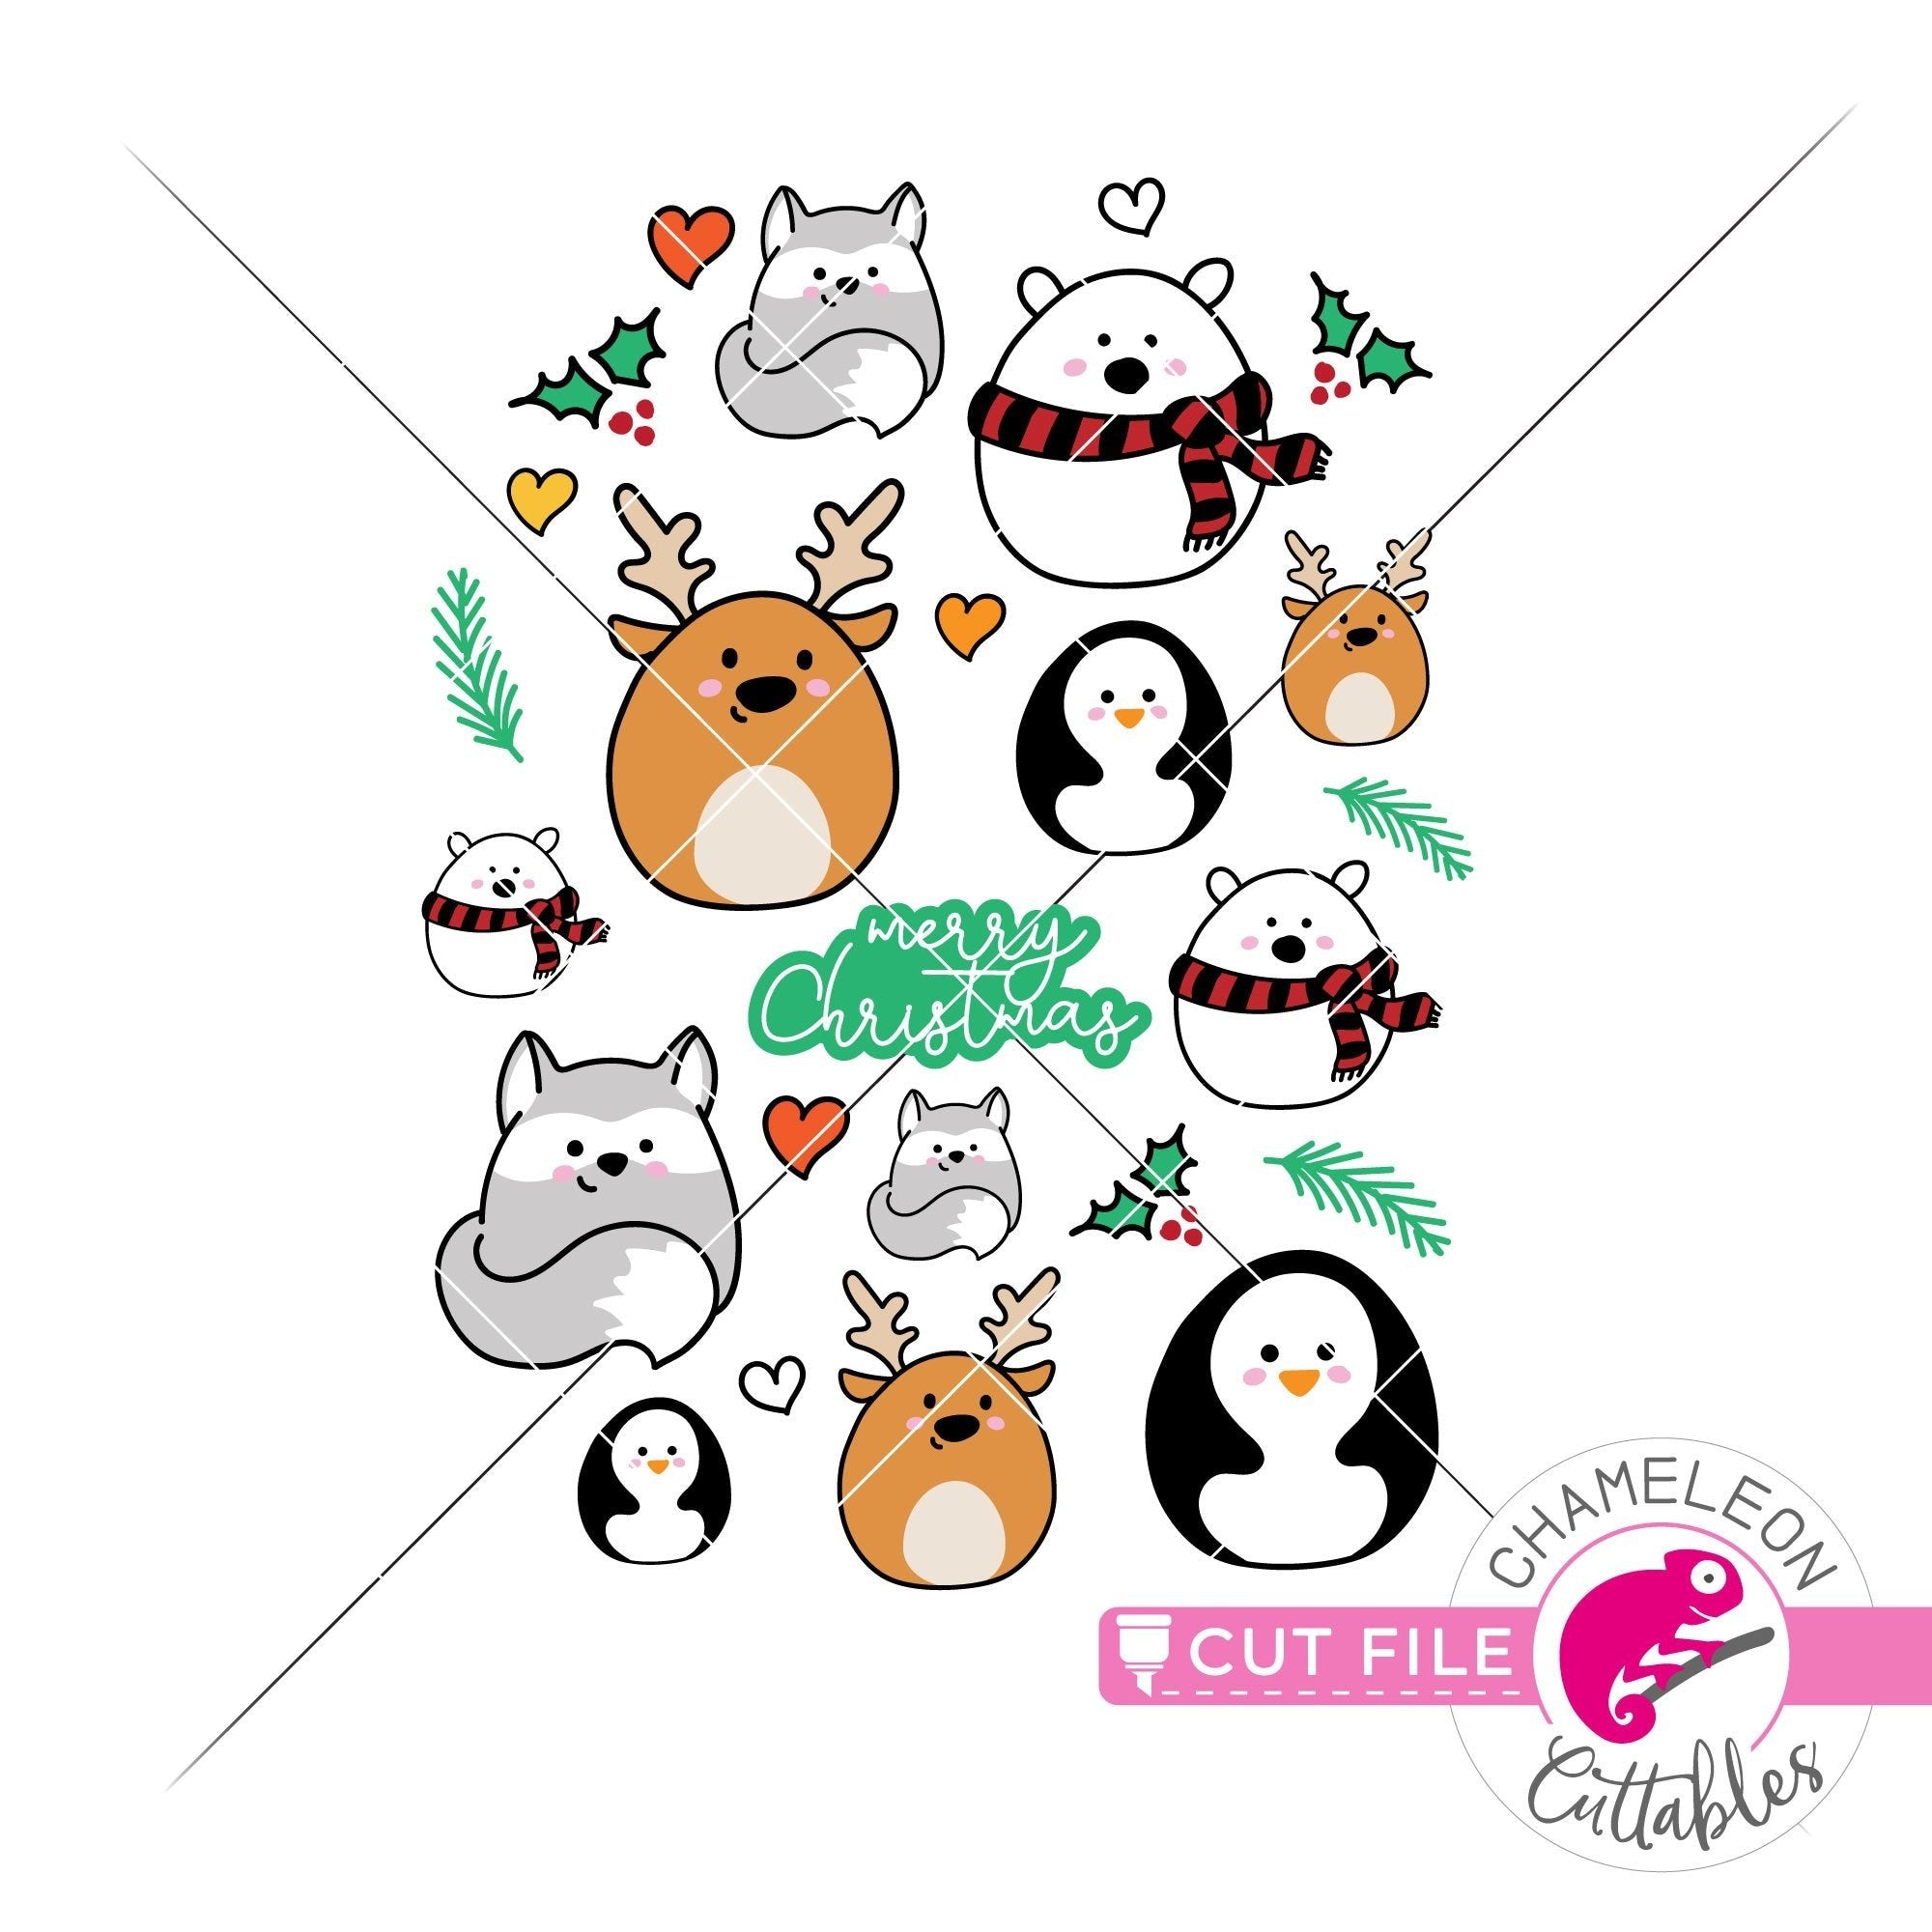 Print and Cut Cute Animal Stickers PNG Chameleon Cuttables LLC